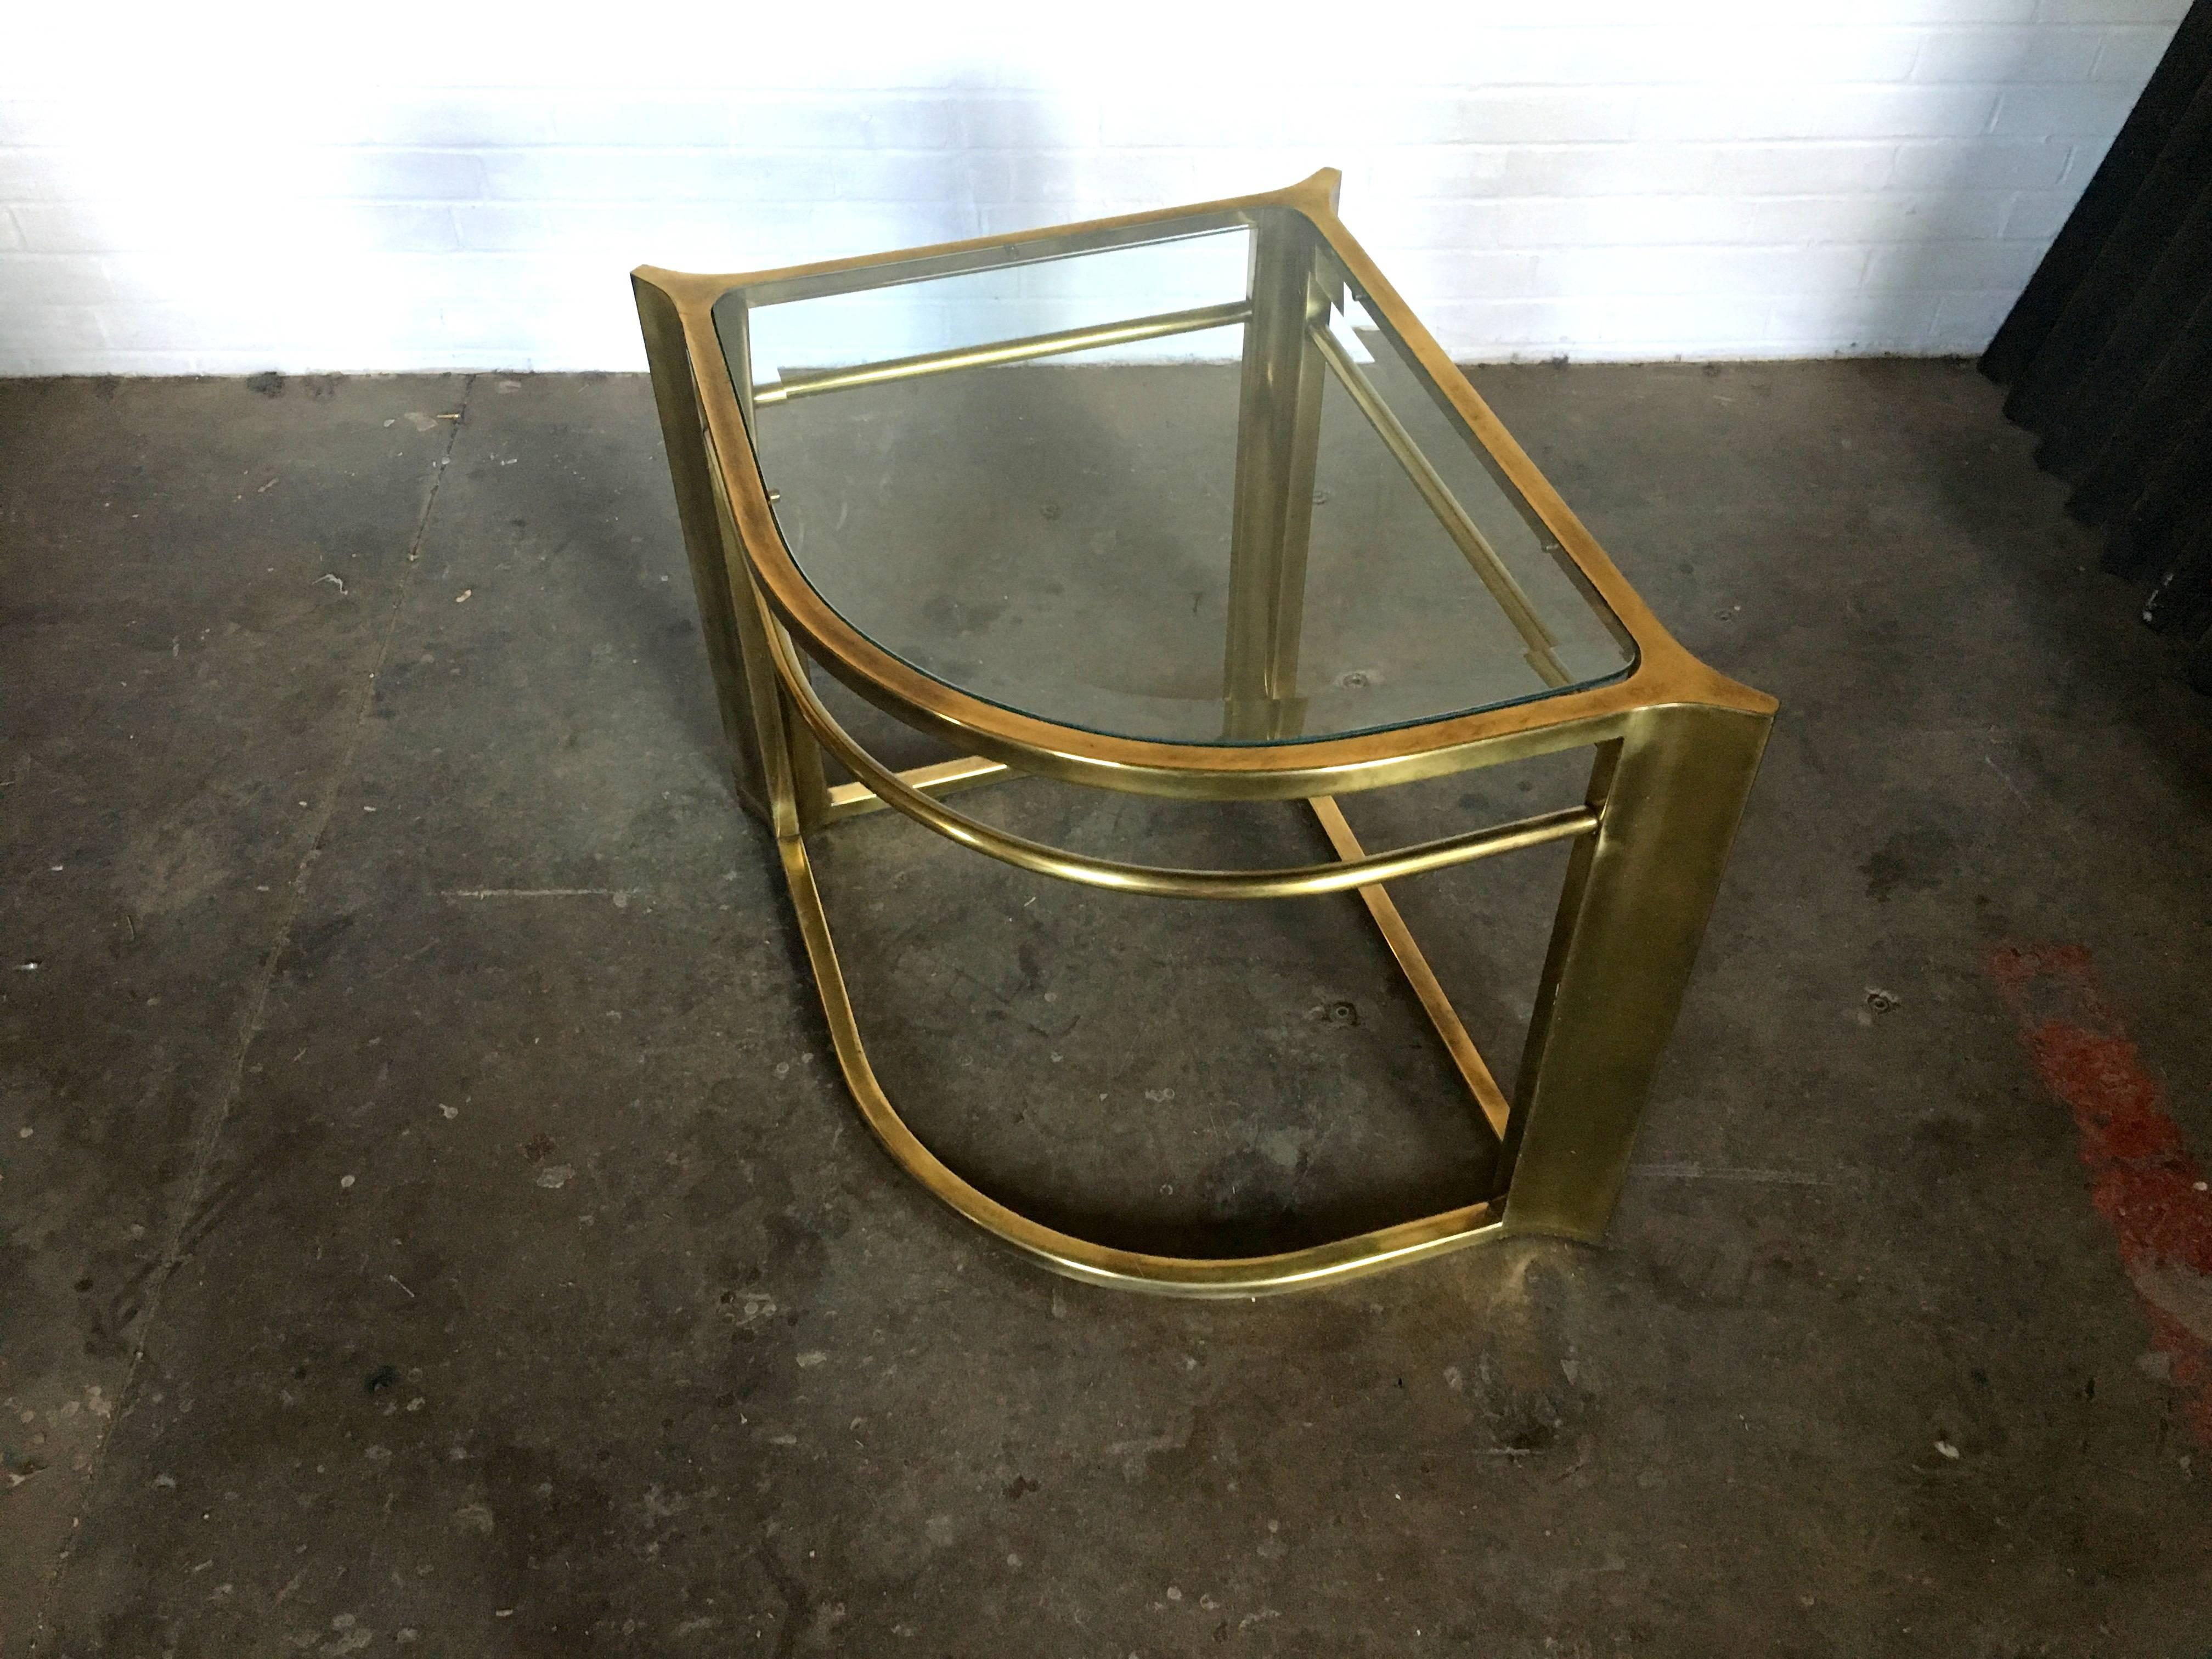 Excellent condition brass and glass end table.
This one doesn't come up that often. And when it does, hardly ever in this condition.
Beautiful shape and ready to grace your home!
Measure: 29" long
24" across
24" high.